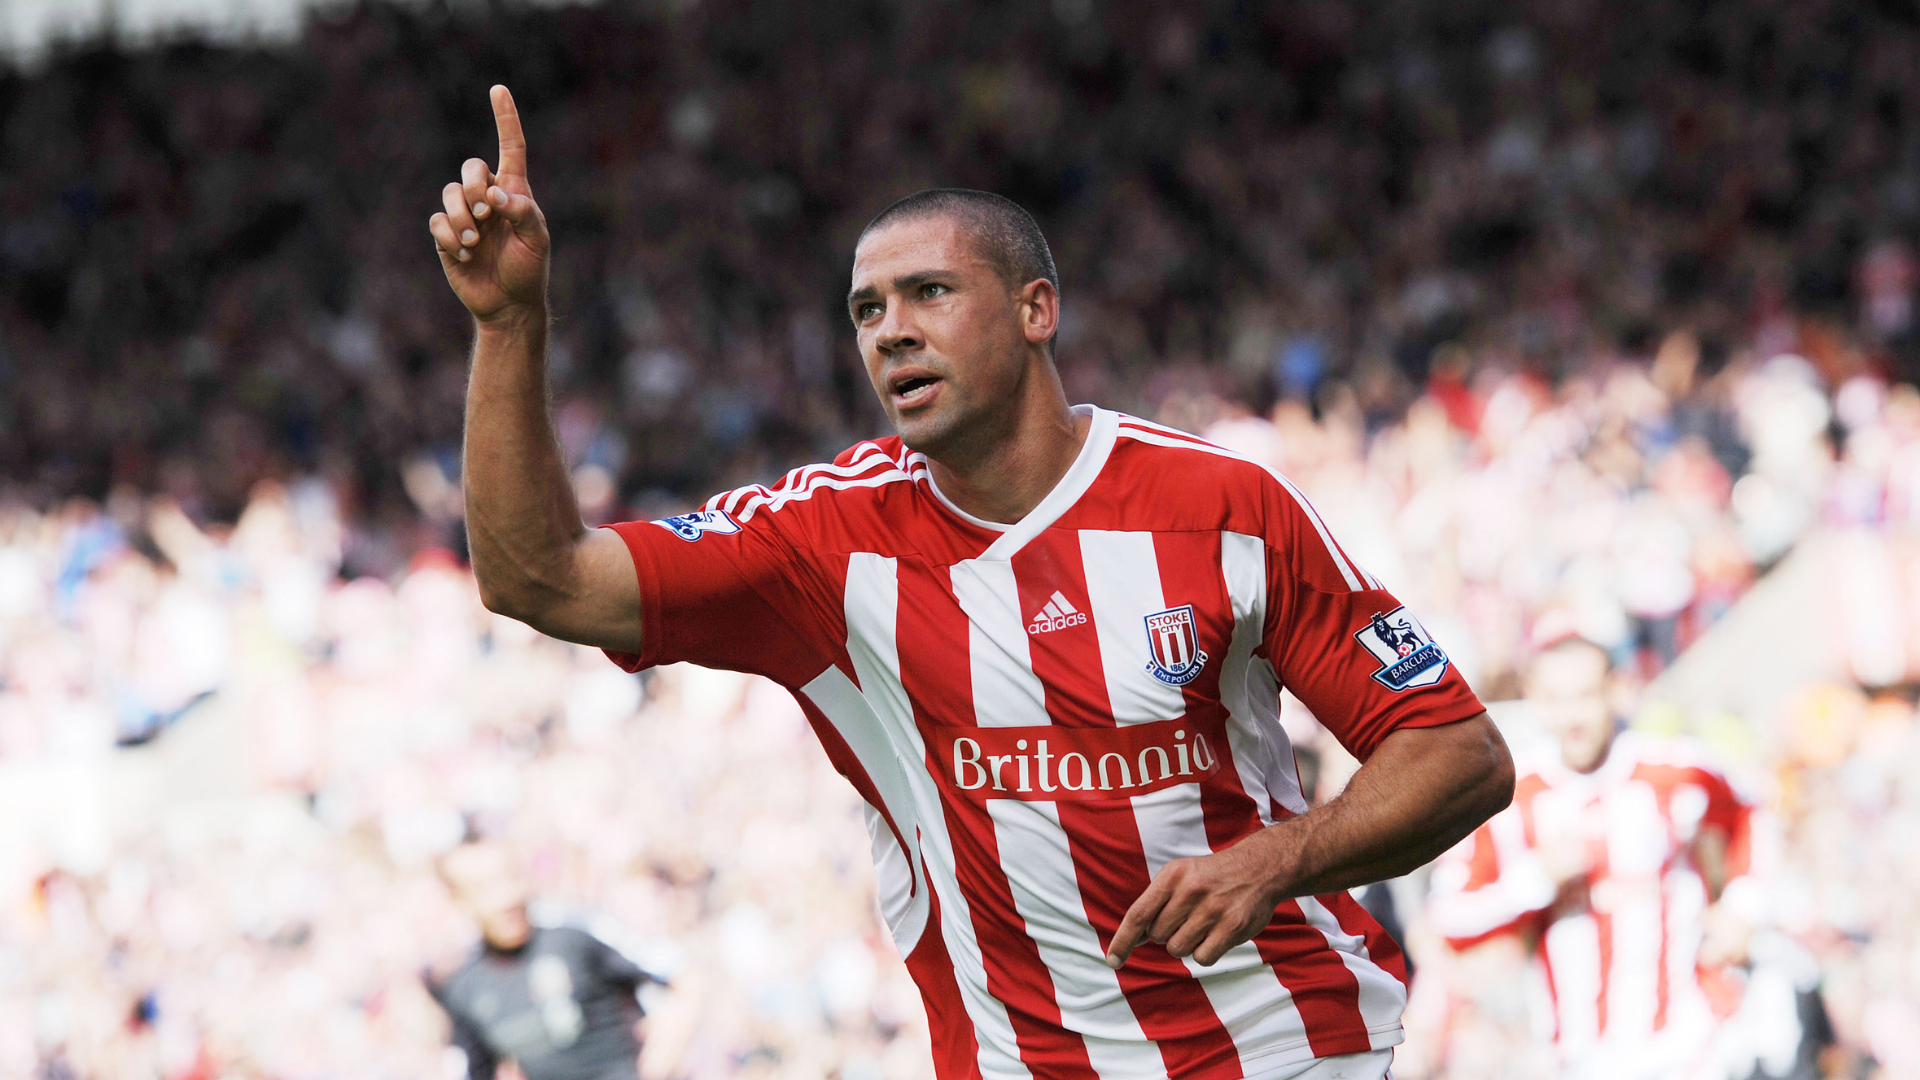 Jonathan Walters celebrates scoring Stoke's first goal with a penalty